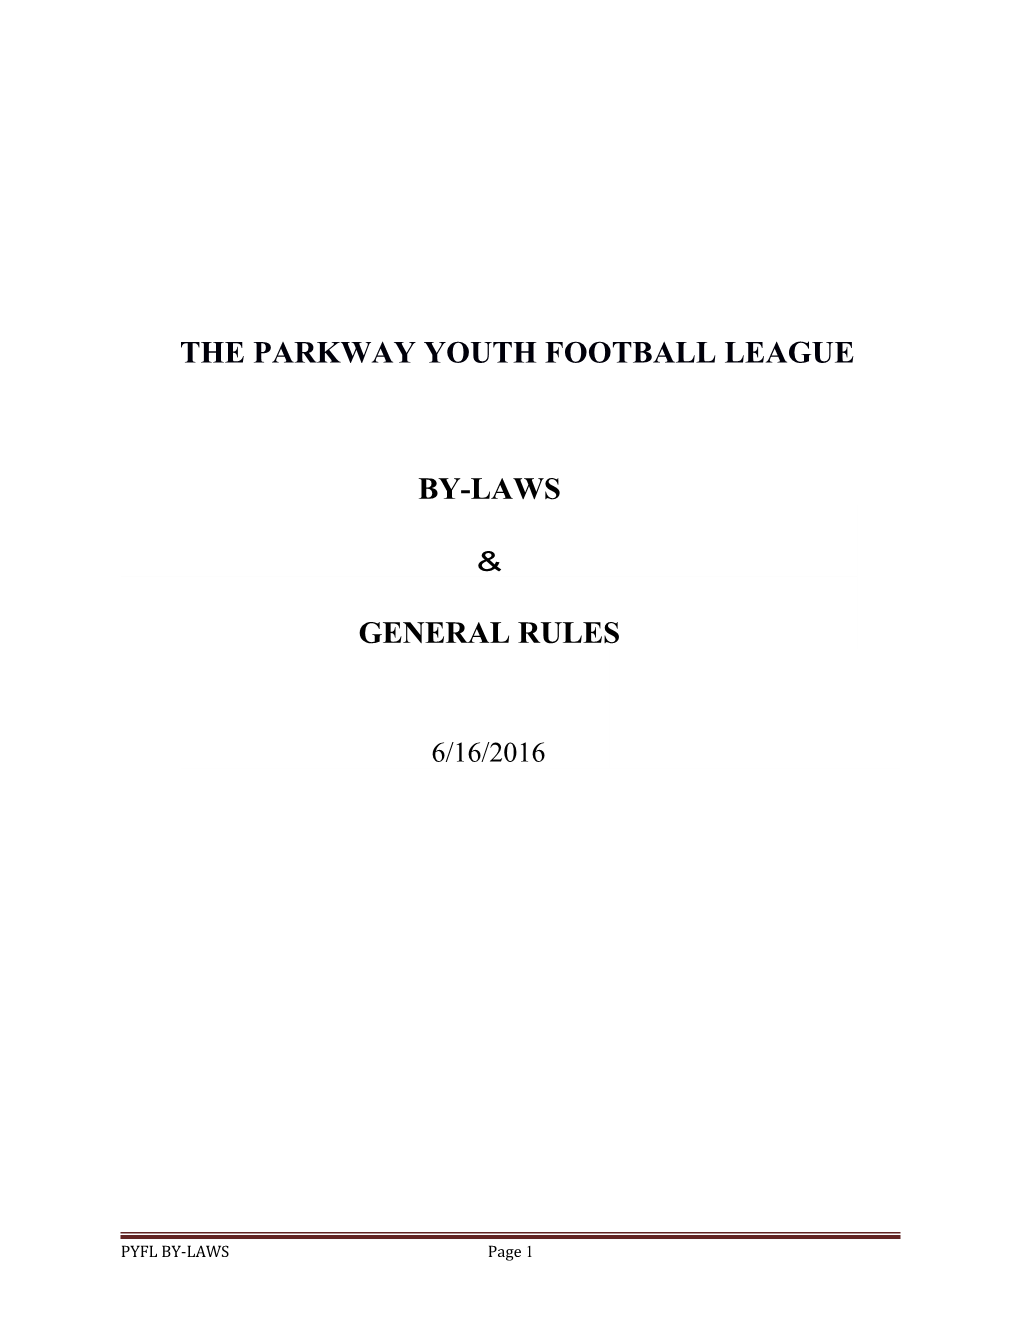 The Parkway Youth Football League